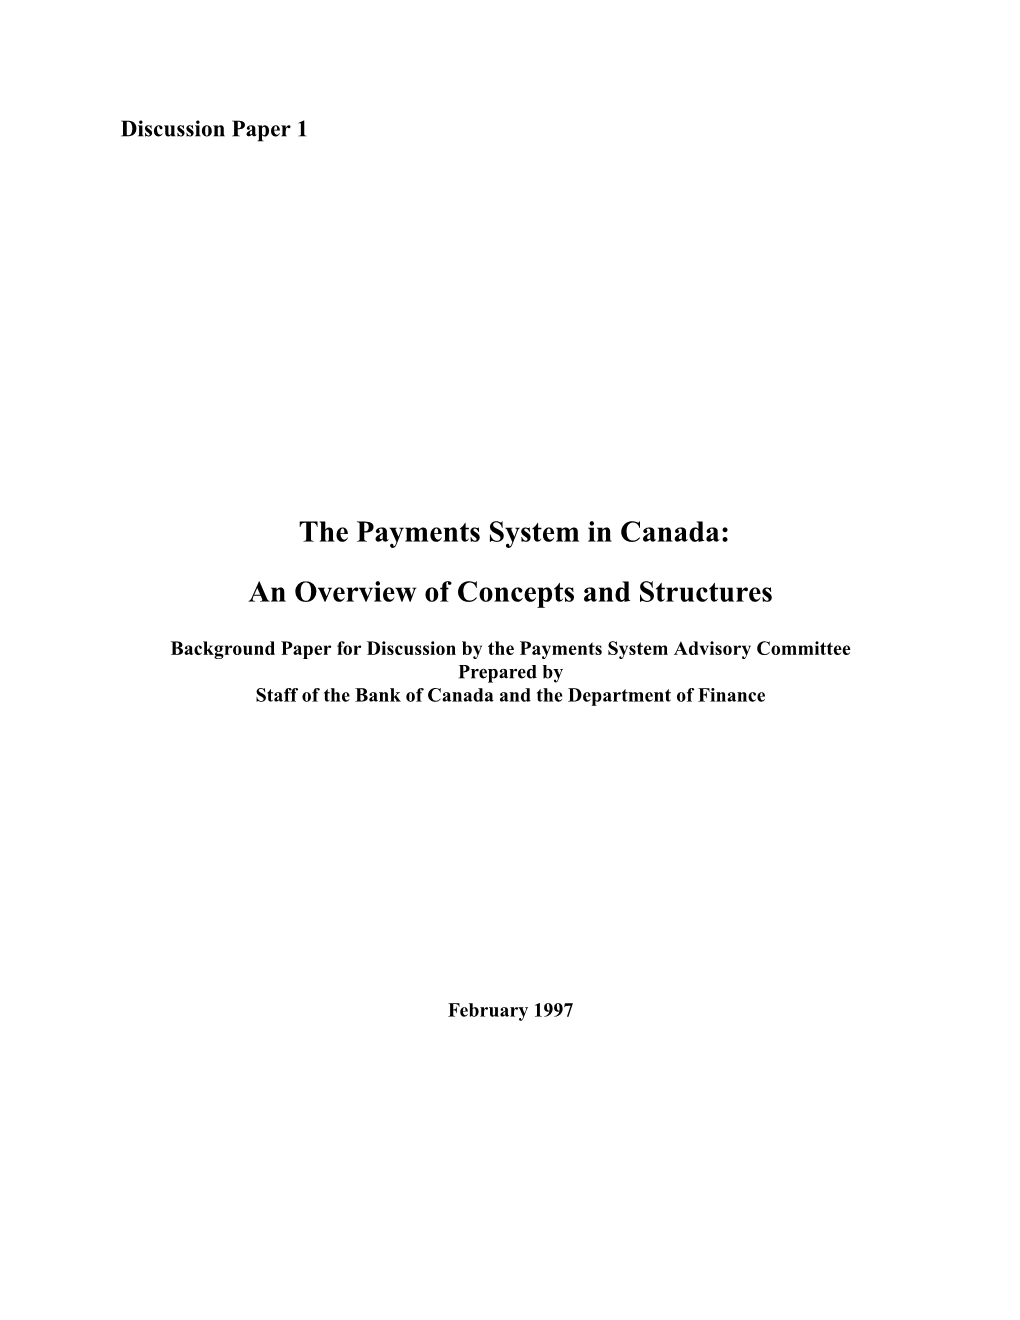 The Payments System in Canada: an Overview of Concepts and Structures